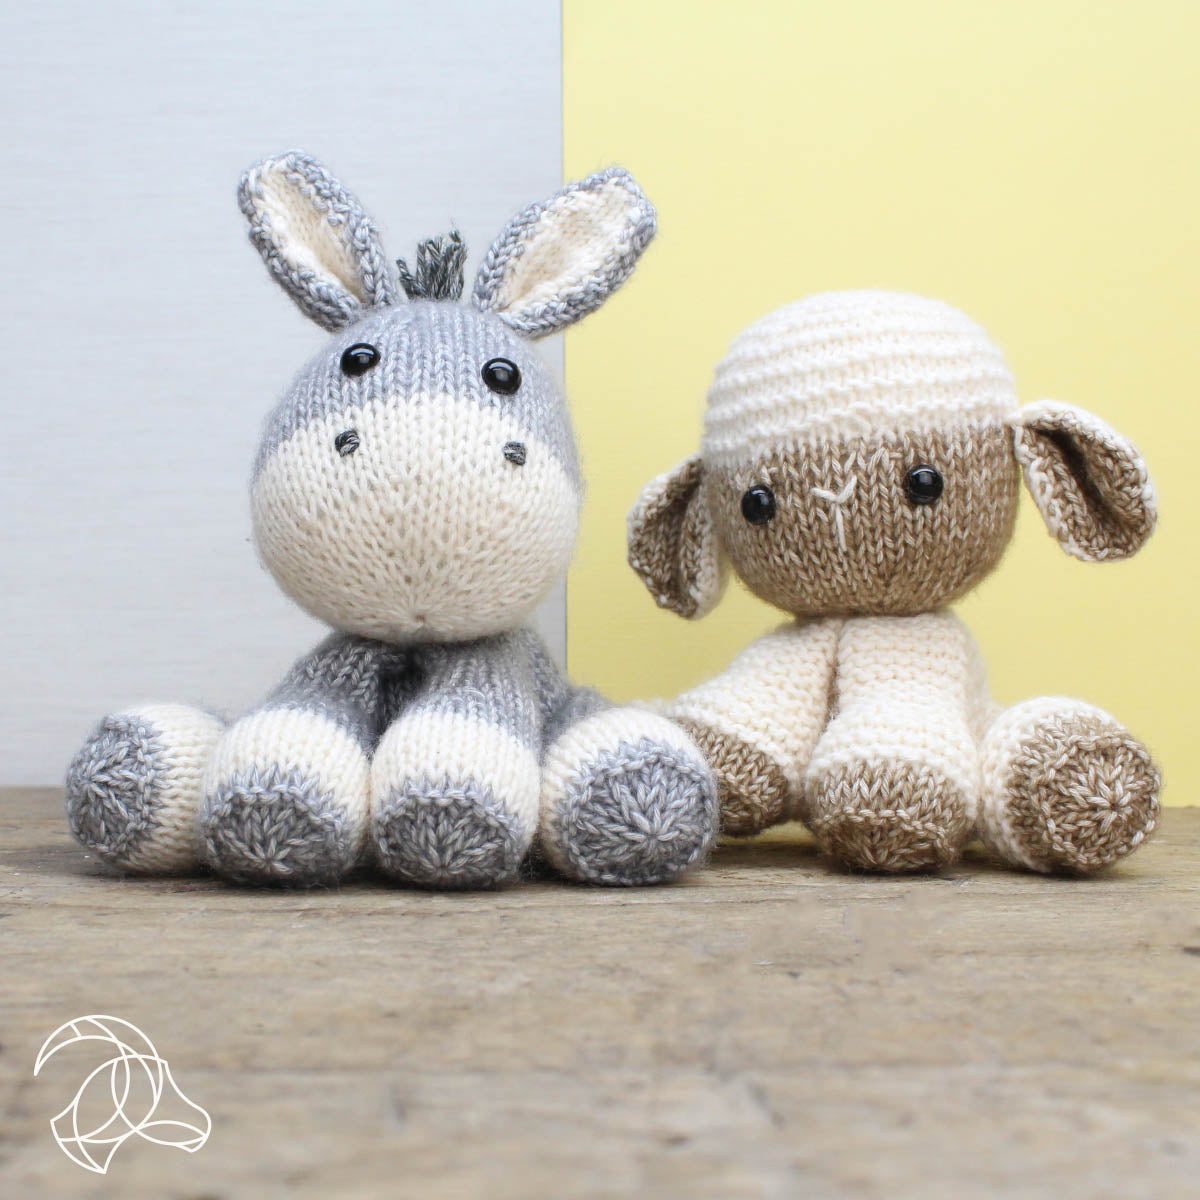 Lore the Little Lamb - Spring Knitting Kit from Hardicraft